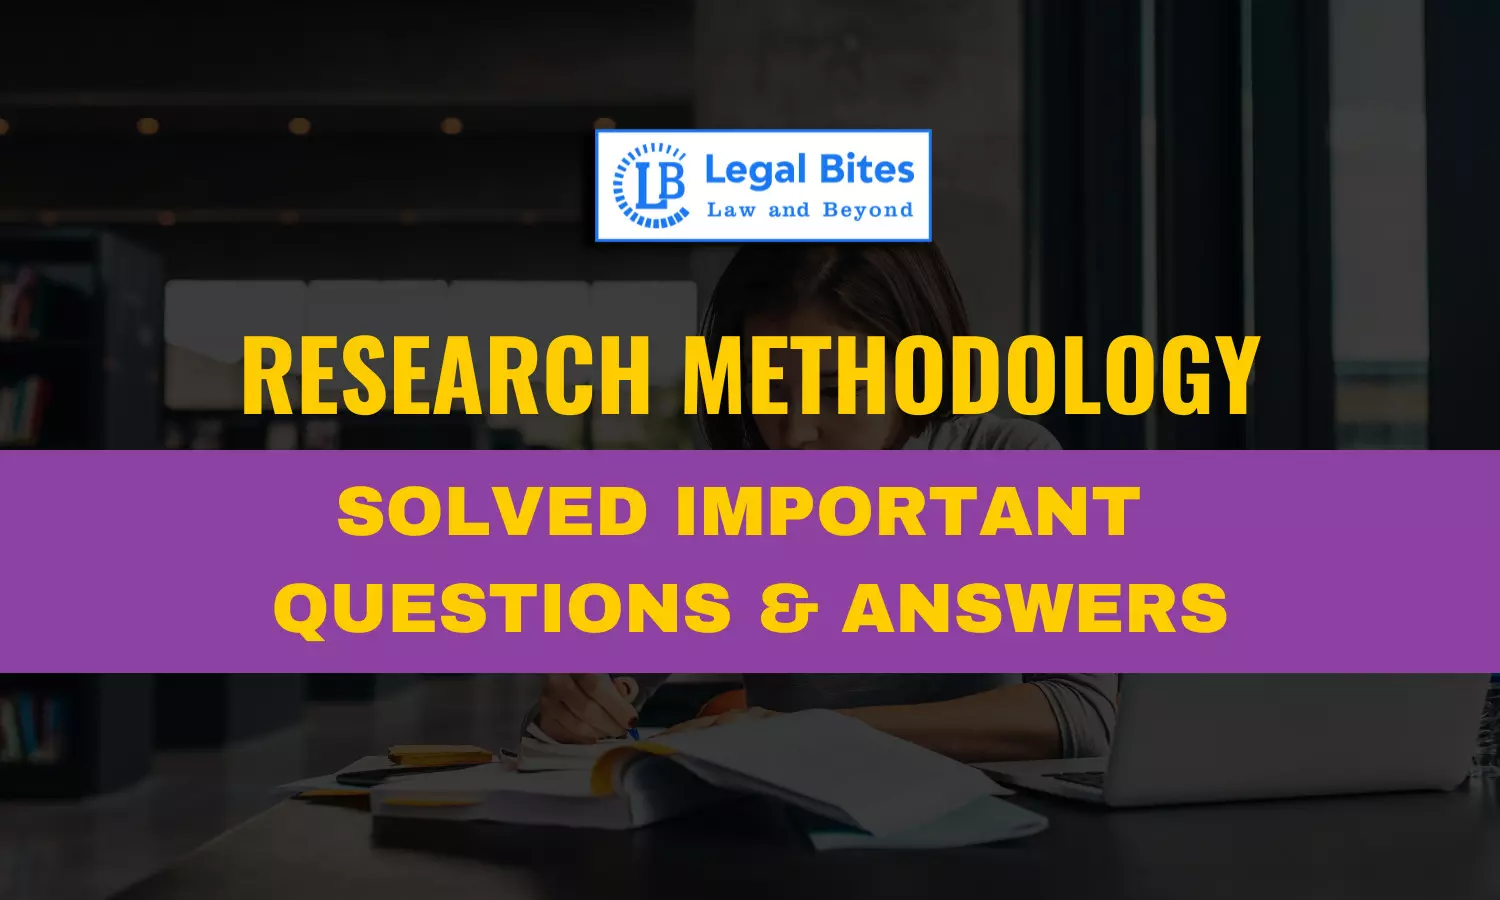 Though there is always a huge necessity for legal reform in a socio-political system like India, but there is little that happens in terms of research for genuine legal reform? Write a critical essay on legal reform in India in the light of the above statement.